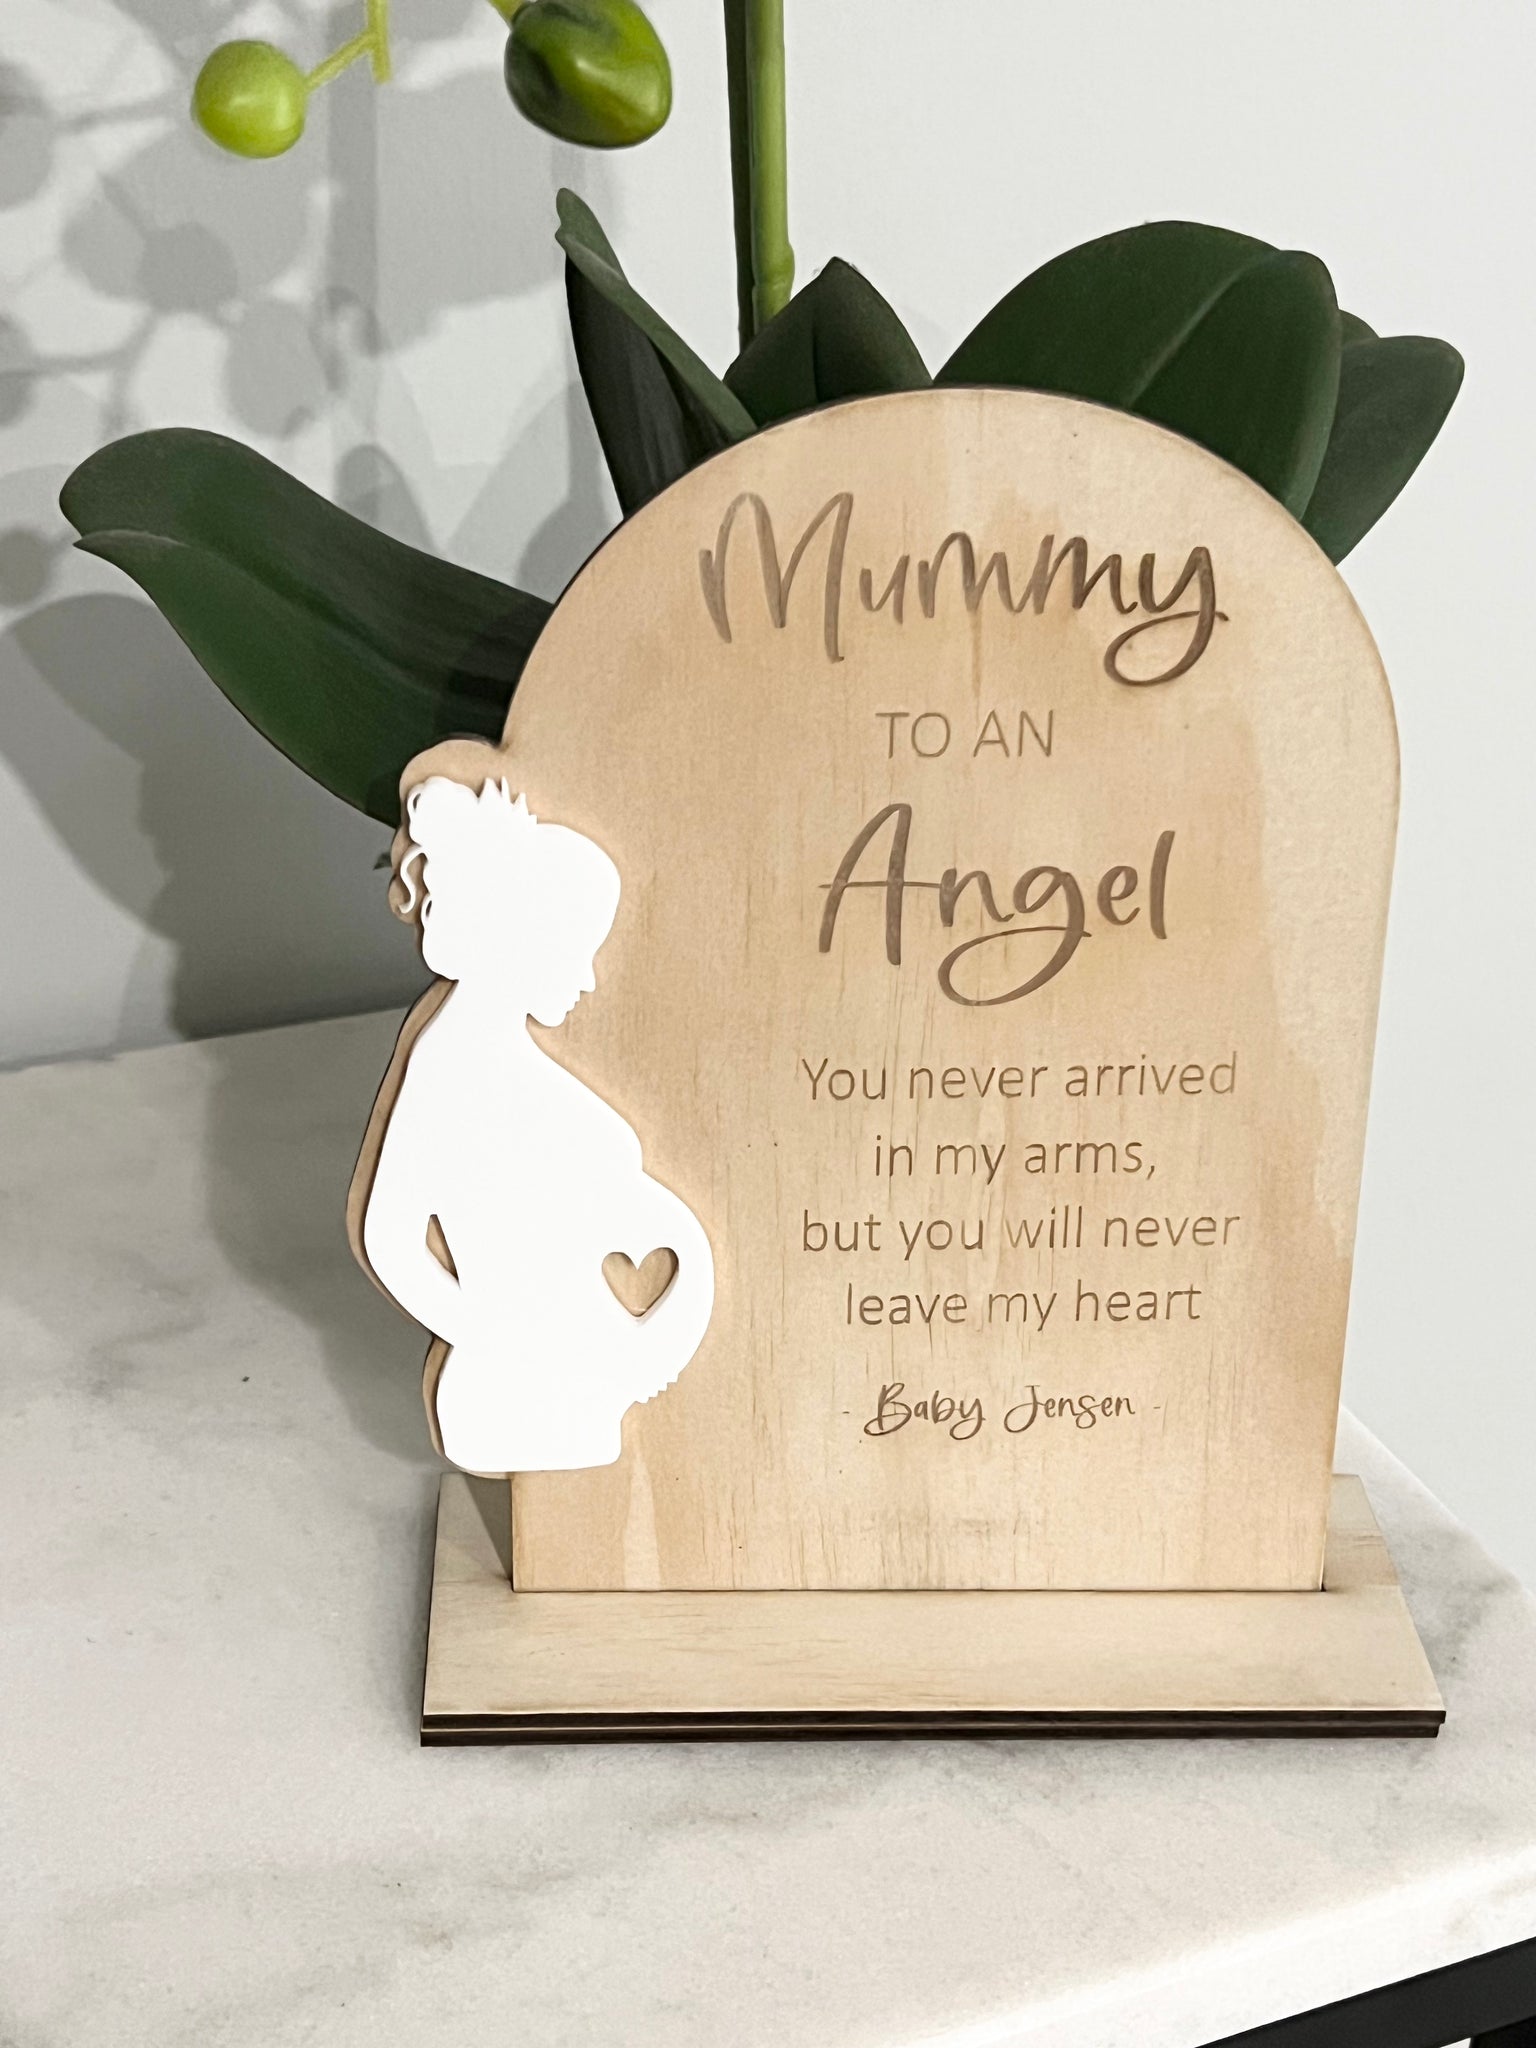 Mummy to an Angel plaque